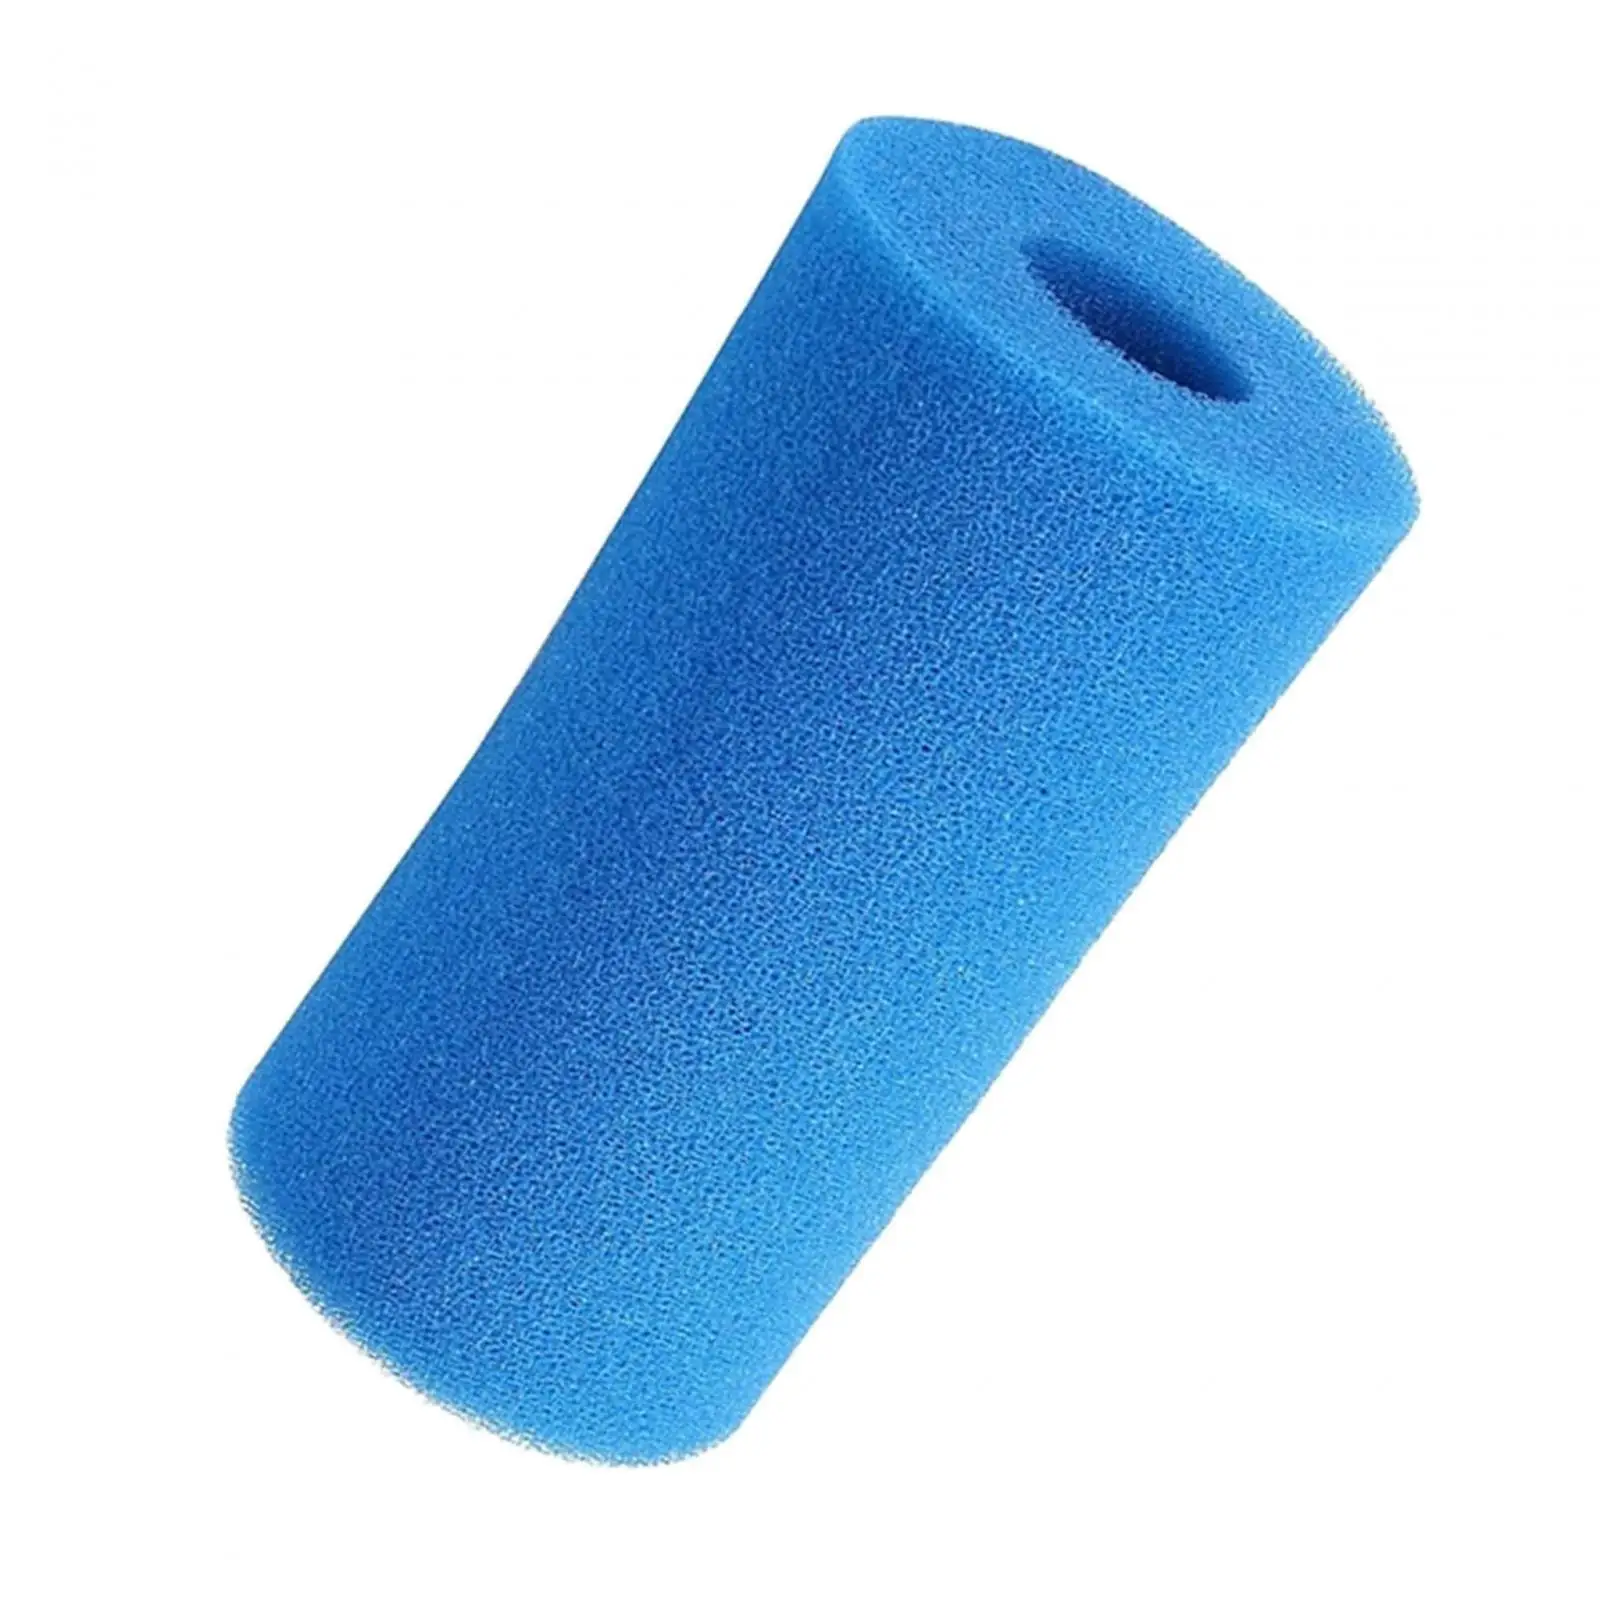 Pool Filter Cartridge/ Pool Filter Sponge Cleaner/ Durable/ Reusable/ Washable Professional Replacement Reused for Type B